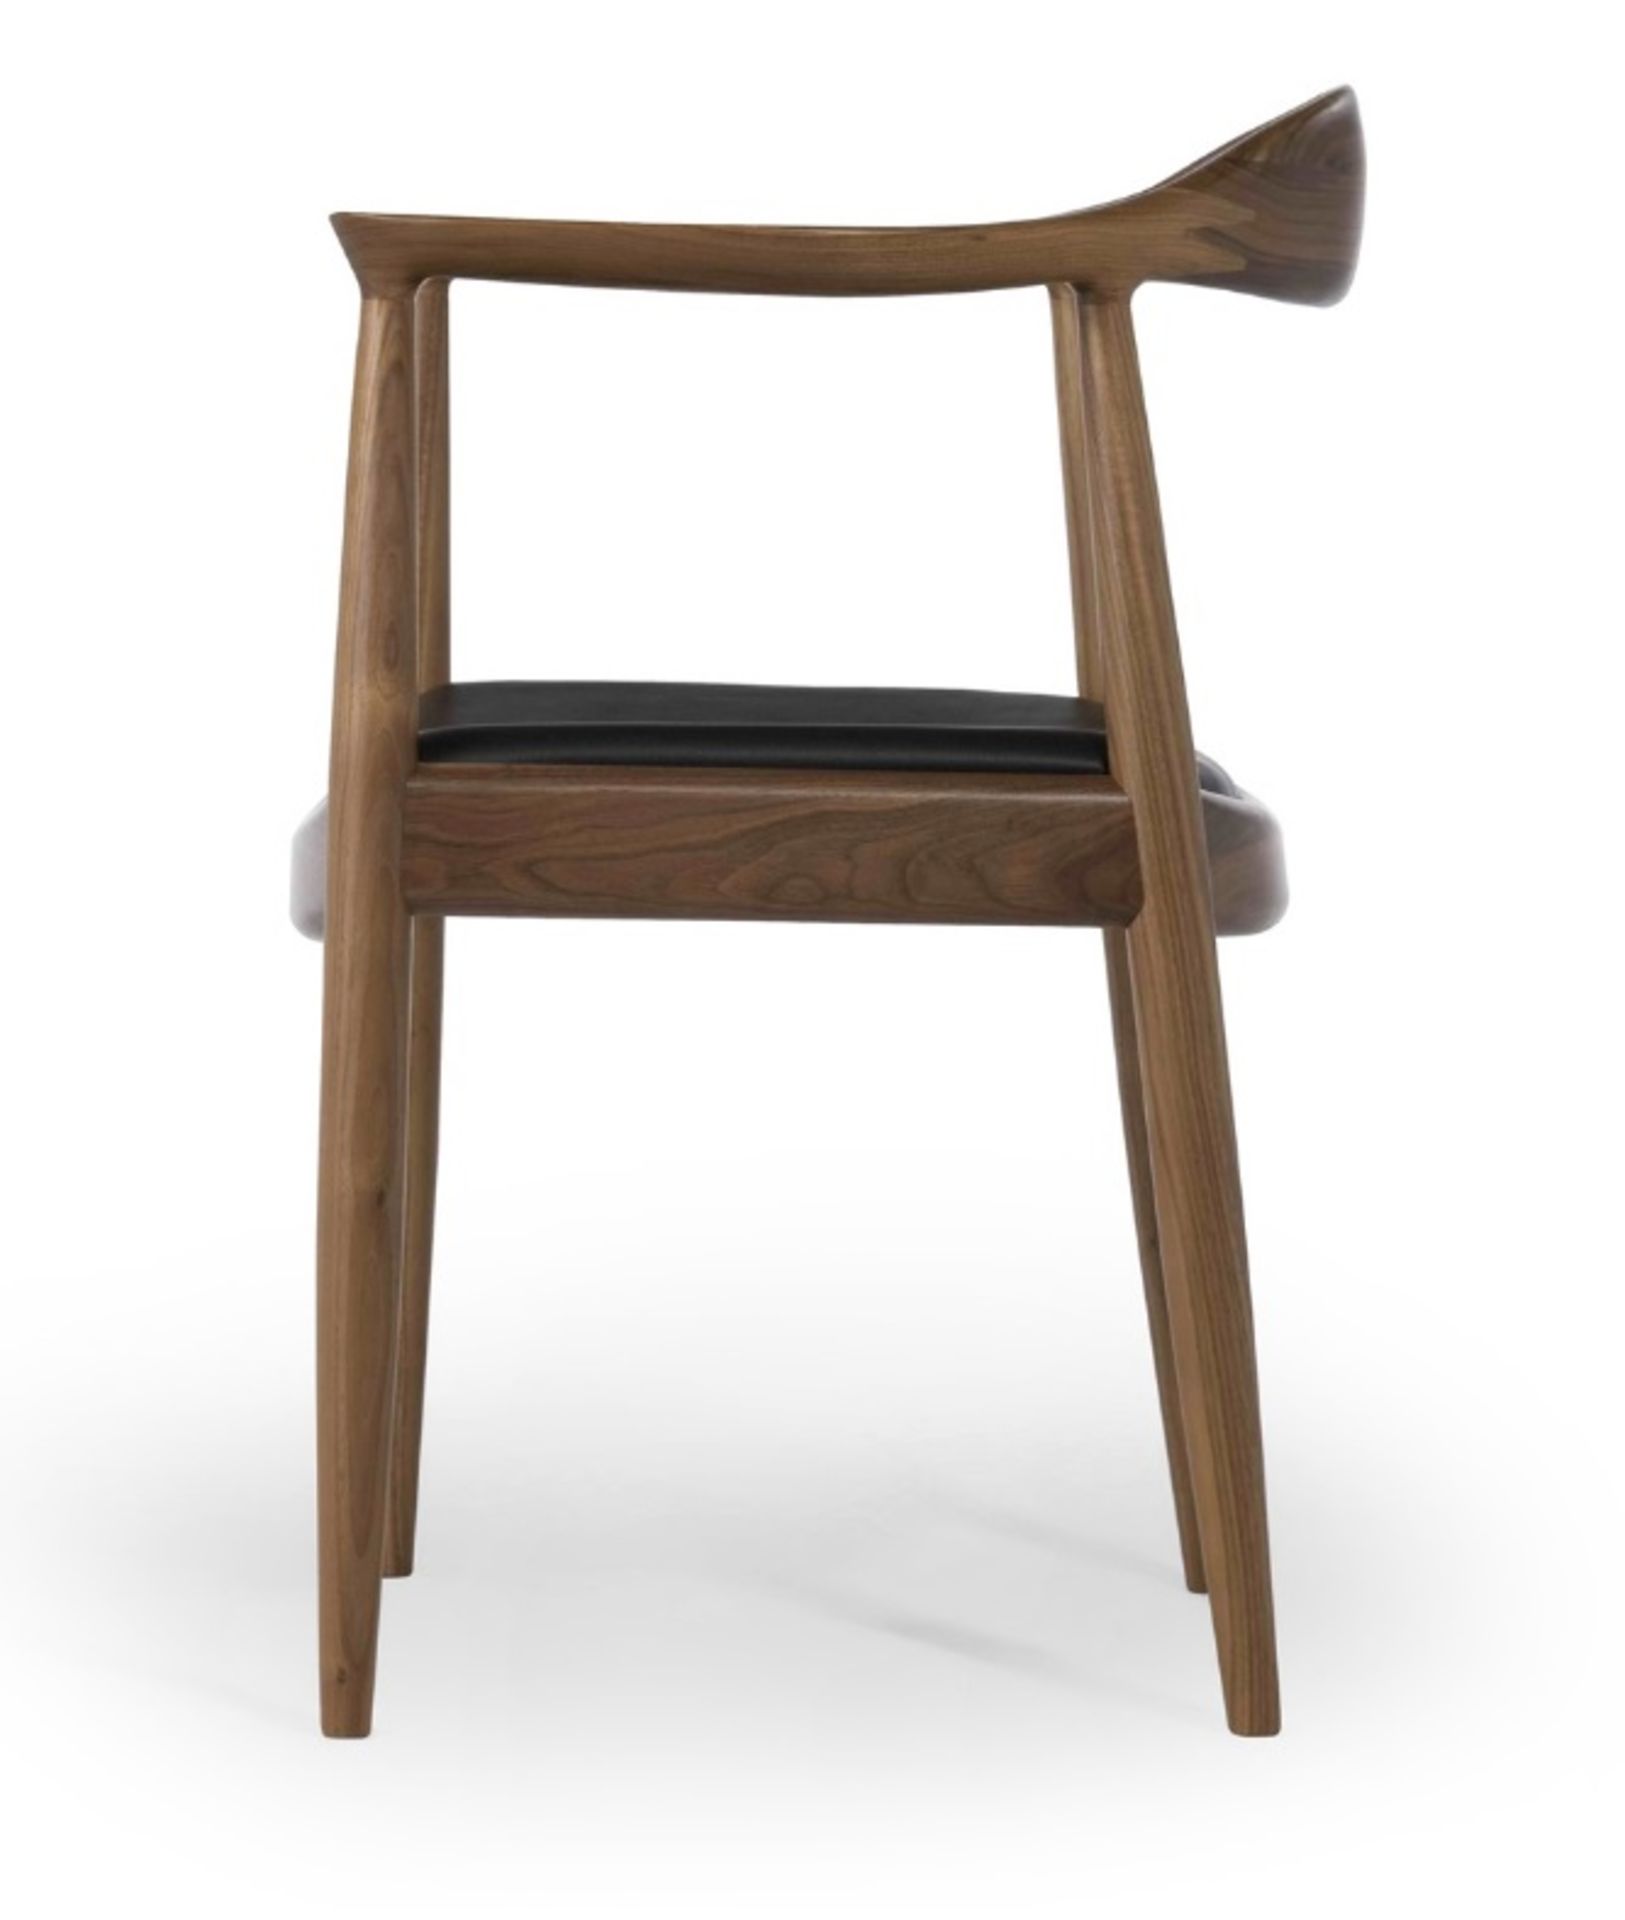 4 x Hans-j Wegner Inspired Dining Chairs In Walnut - New & Boxed- CL508 - Location: Altrincham WA14 - Image 5 of 5